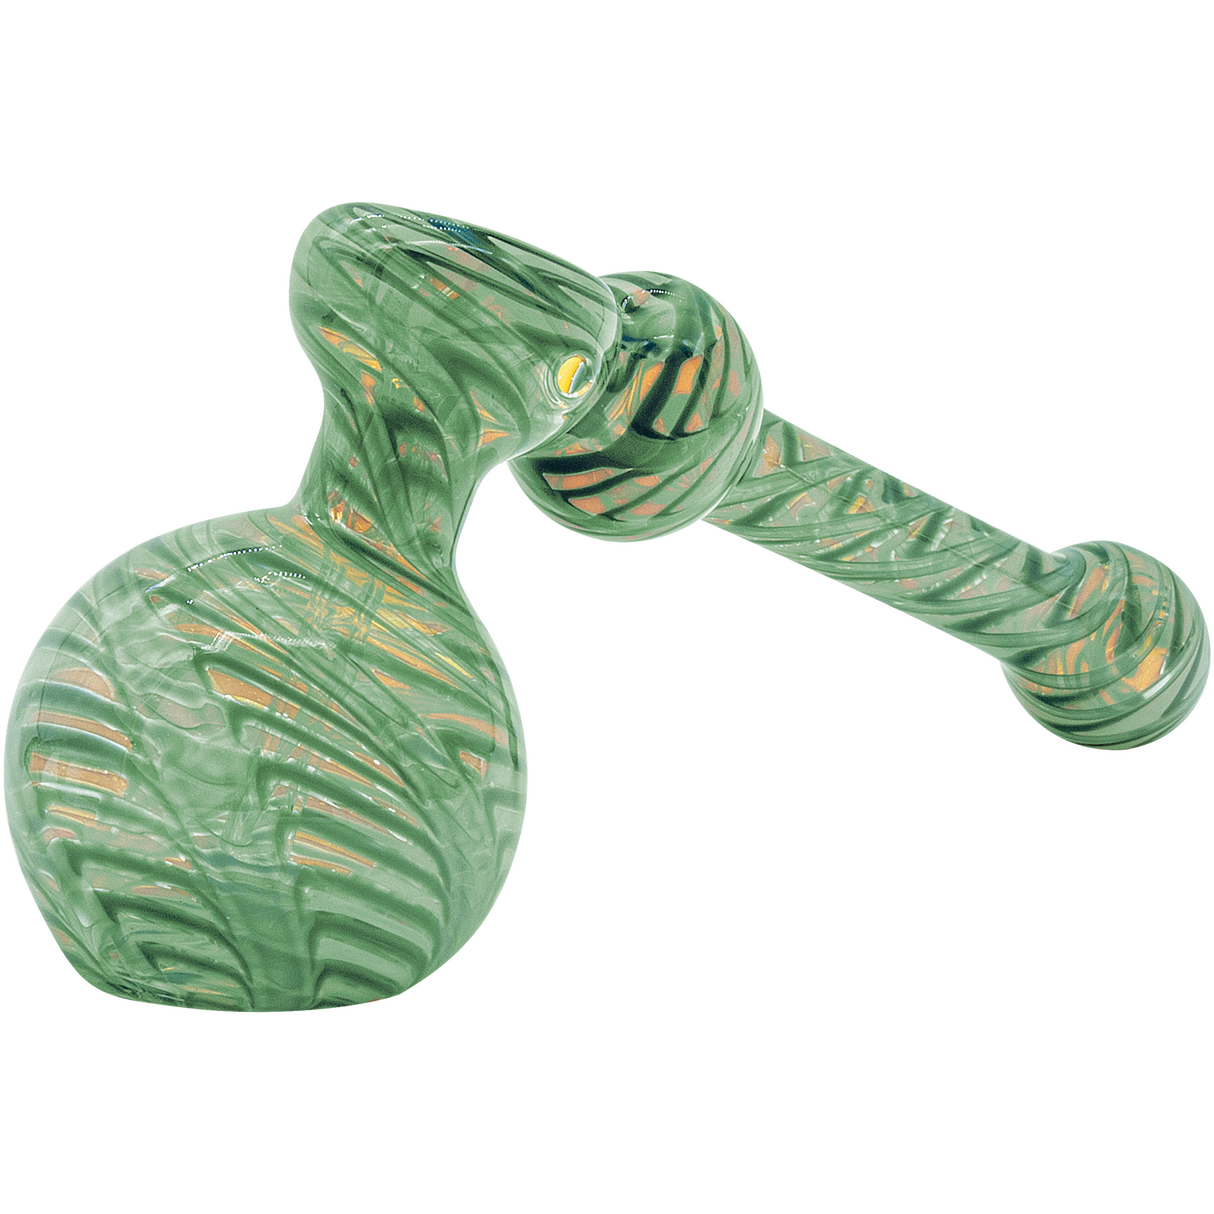 LA Pipes "Full Rake" Fumed Hammer Bubbler in Forest Green with Swirl Design, Side View